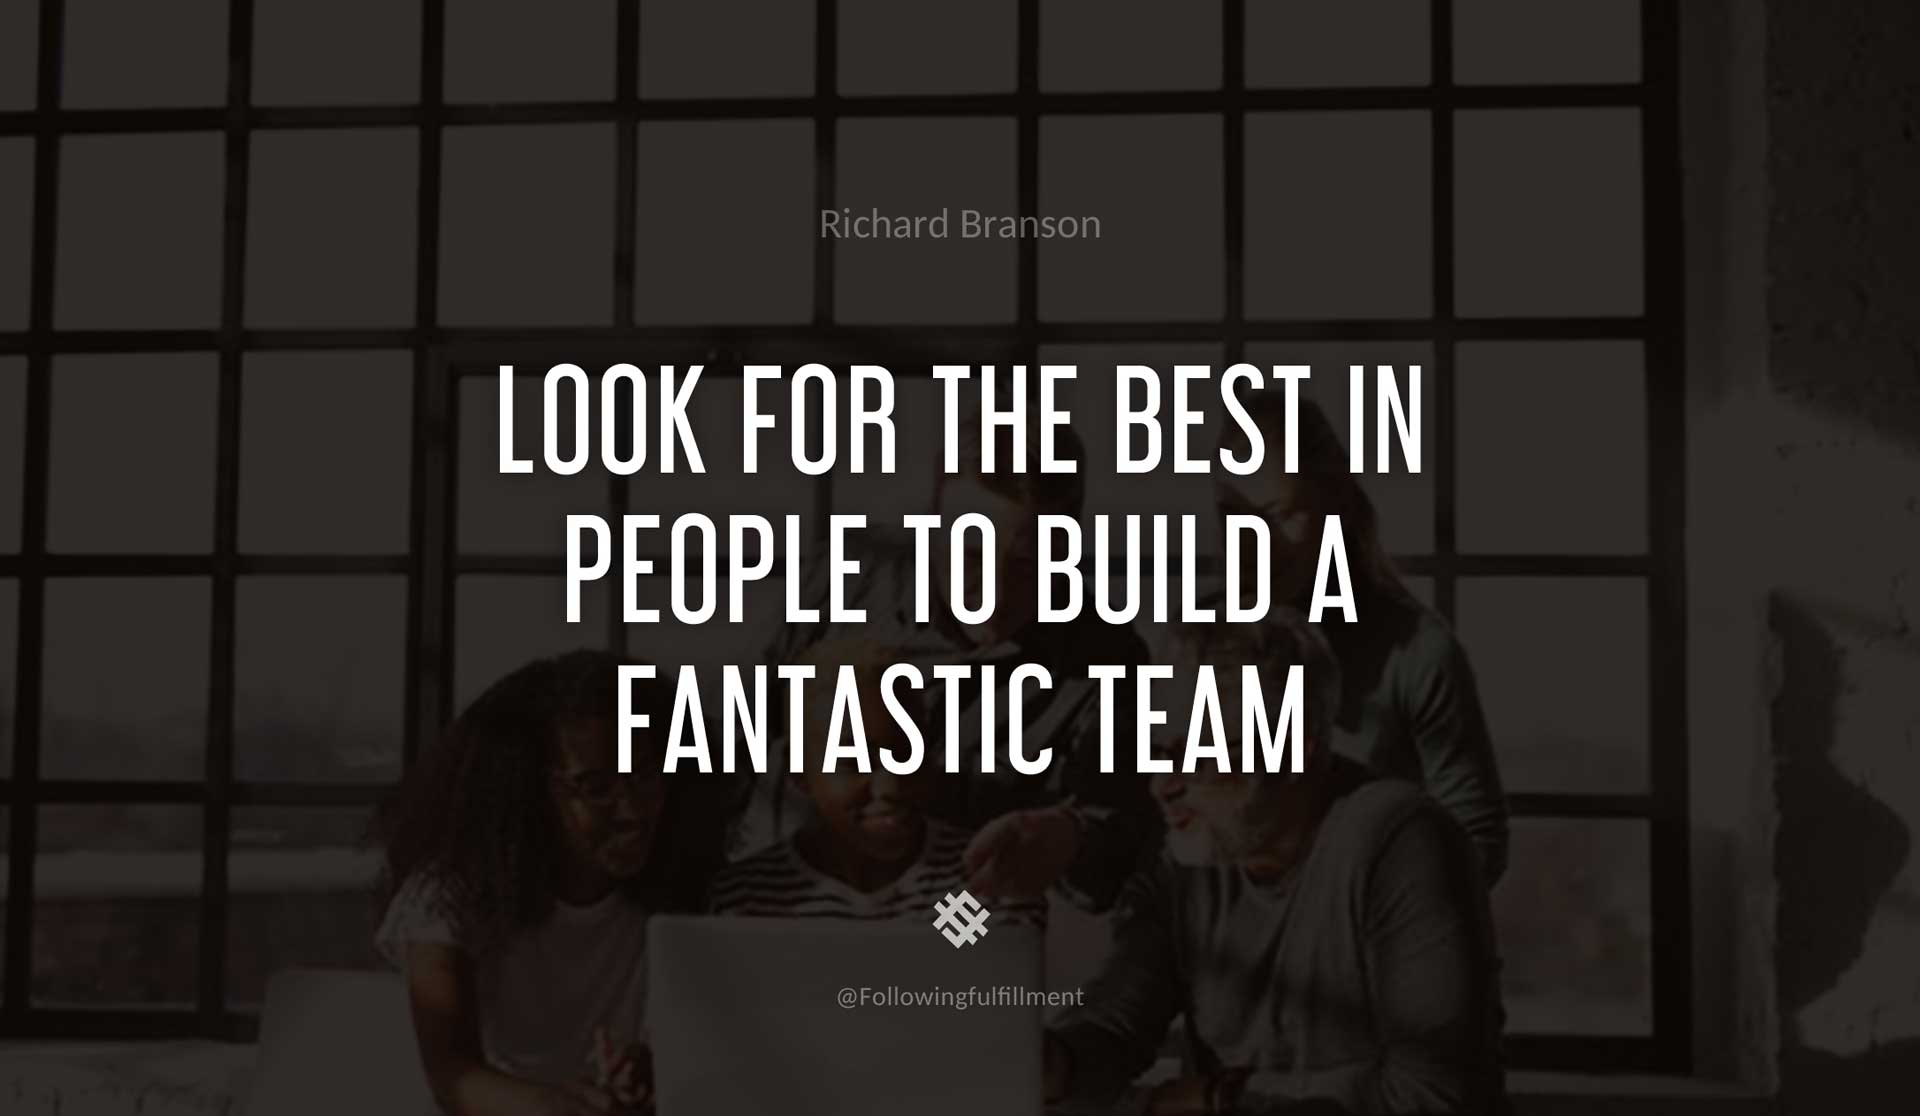 Look-for-the-best-in-people-to-build-a-fantastic-team-RICHARD-BRANSON-Quote.jpg